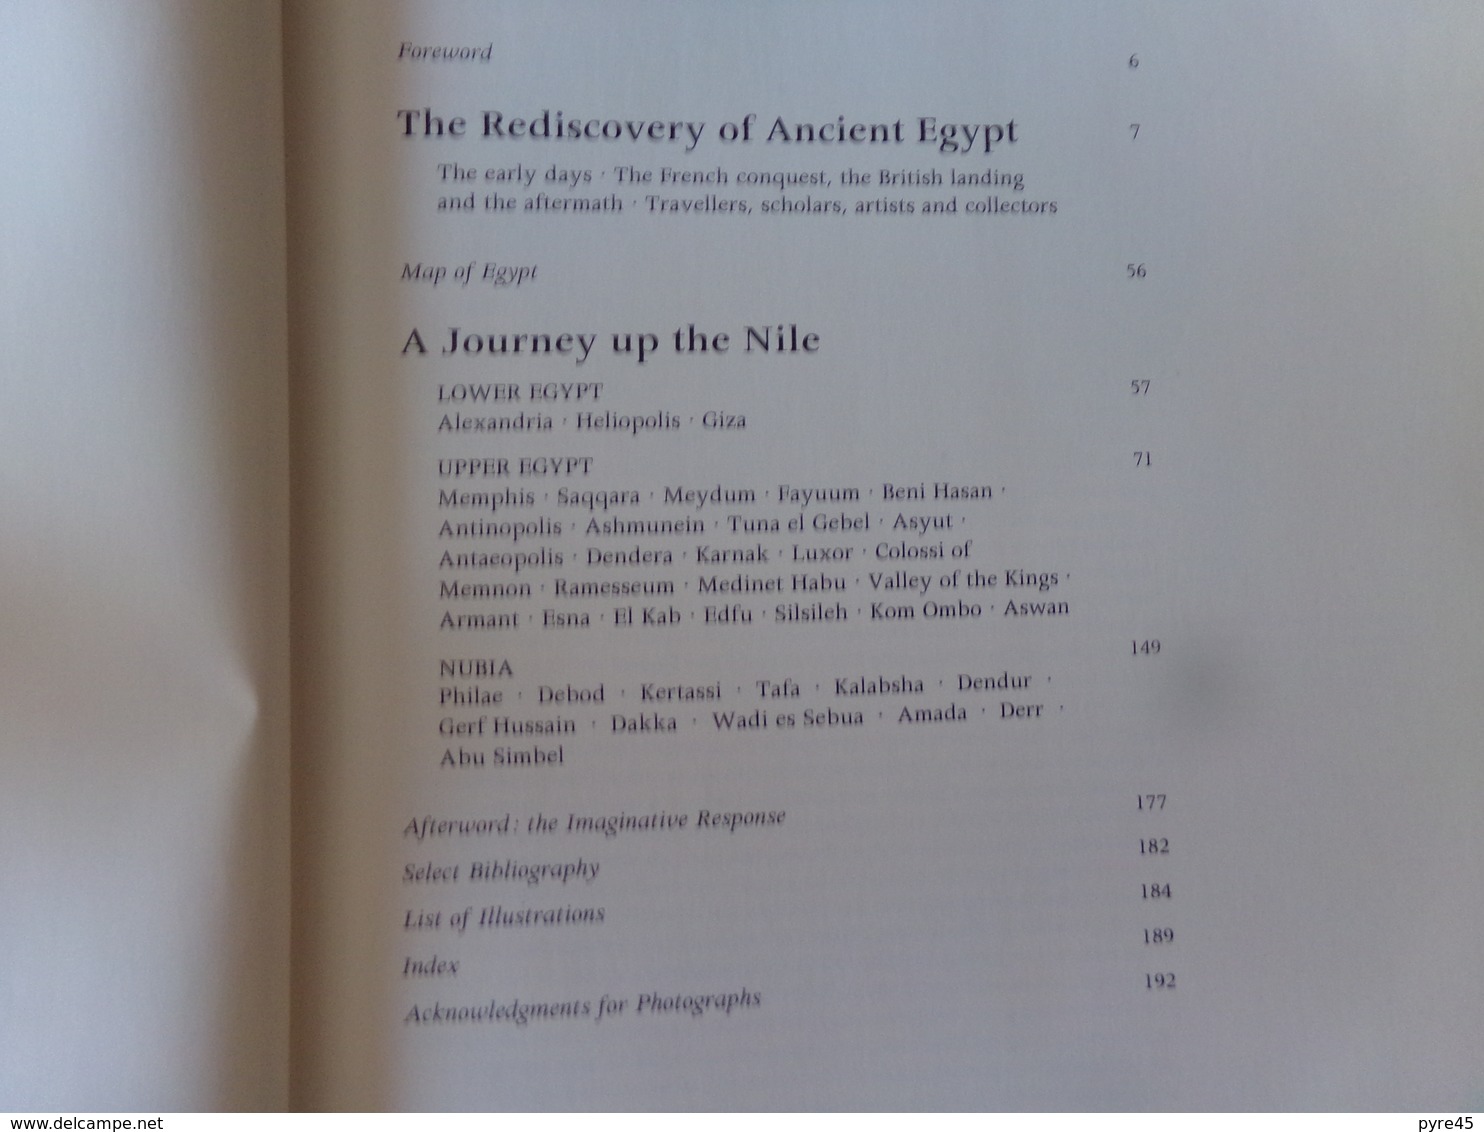 The Rediscovery Of Ancient Egypt, Peter Clayton, 1982, 192 Pages - Africa